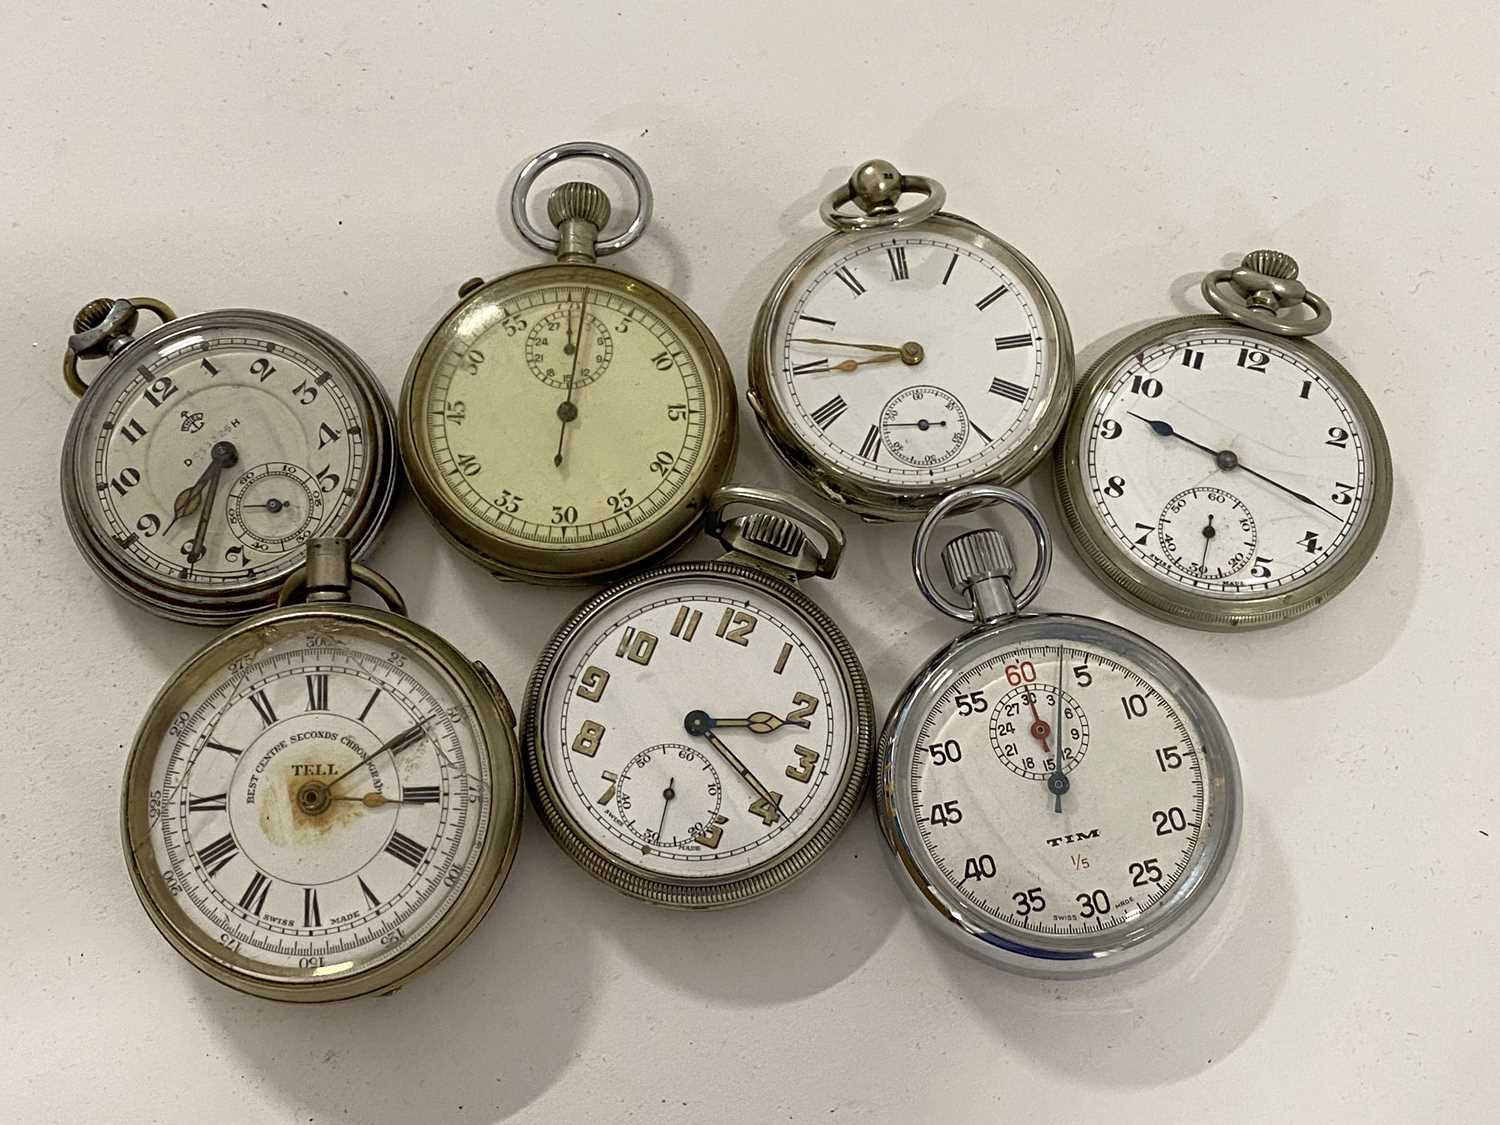 Group of seven various cased pocket watches and stop watches in base metal/white metal and plated